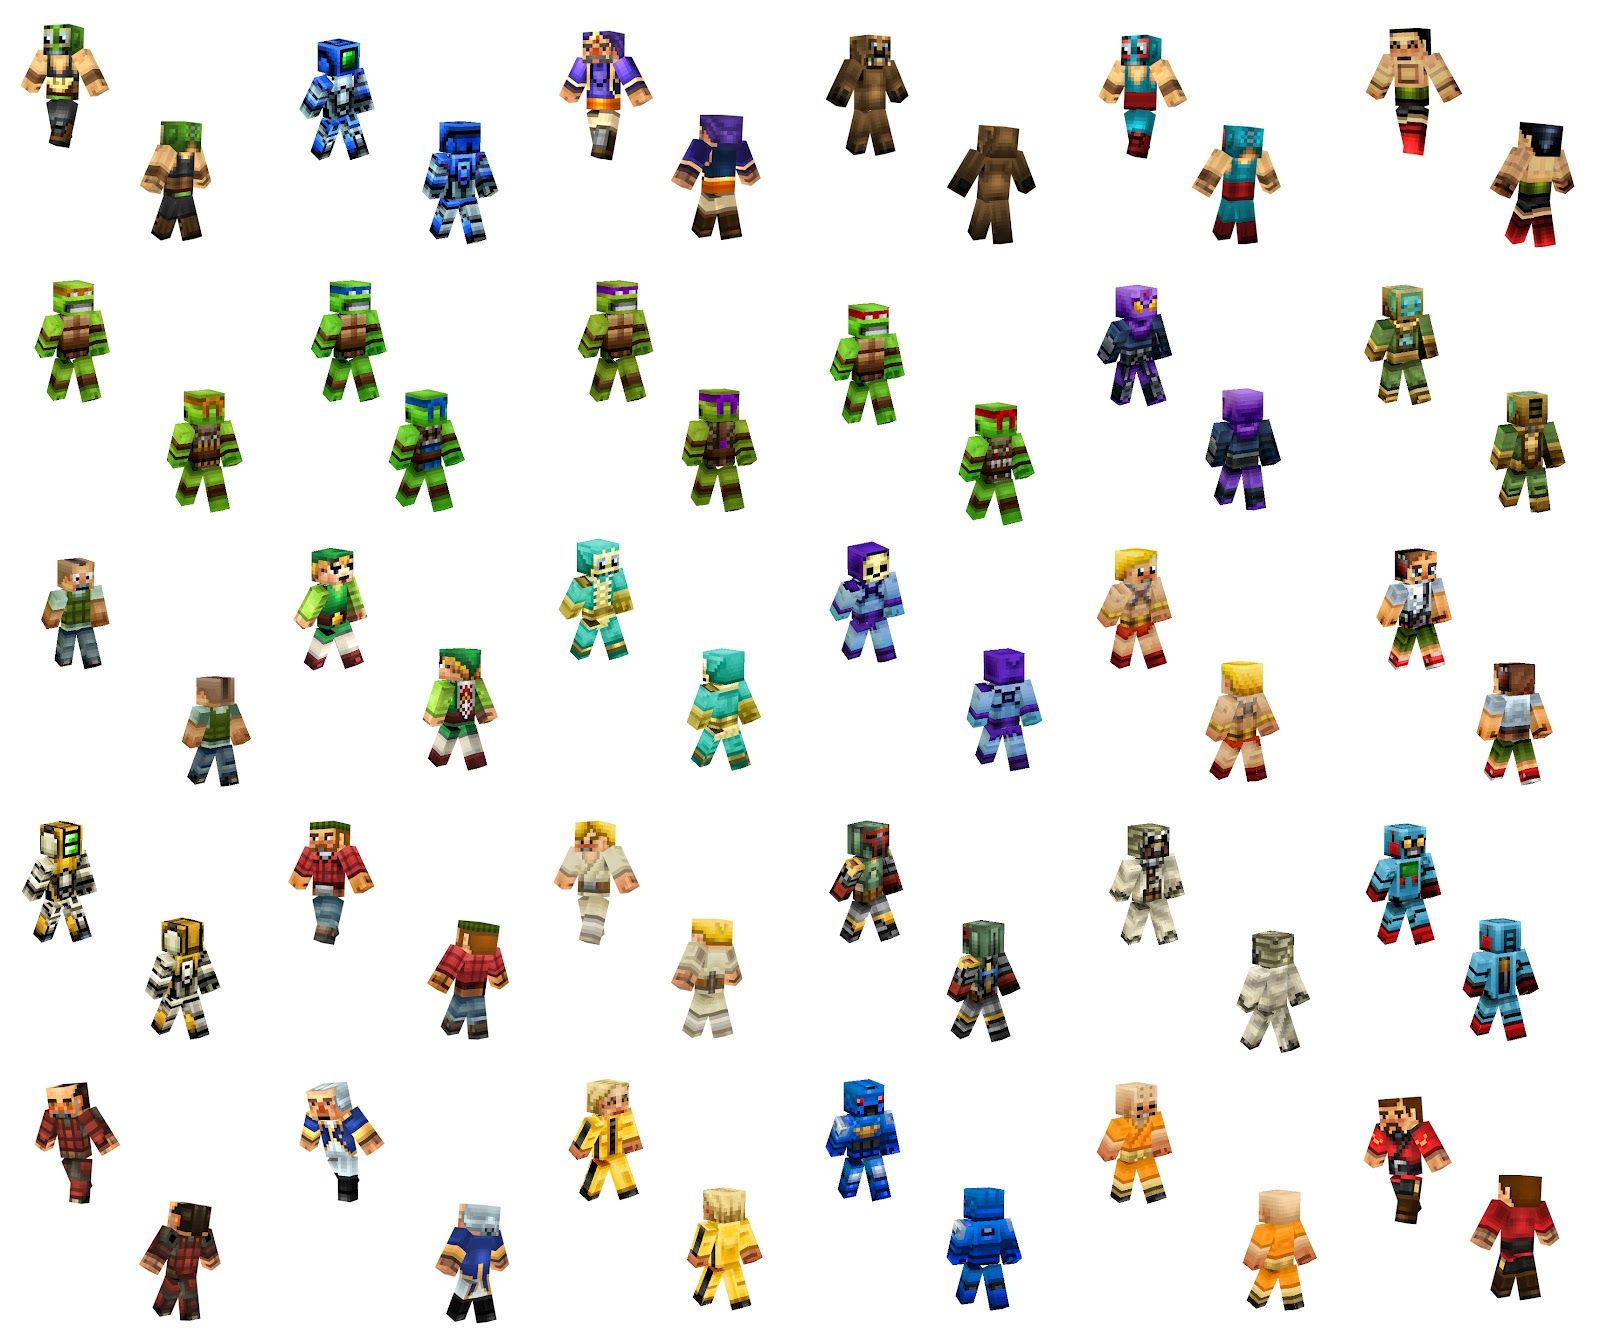 Free download yesterday i posted all my Minecraft skins up